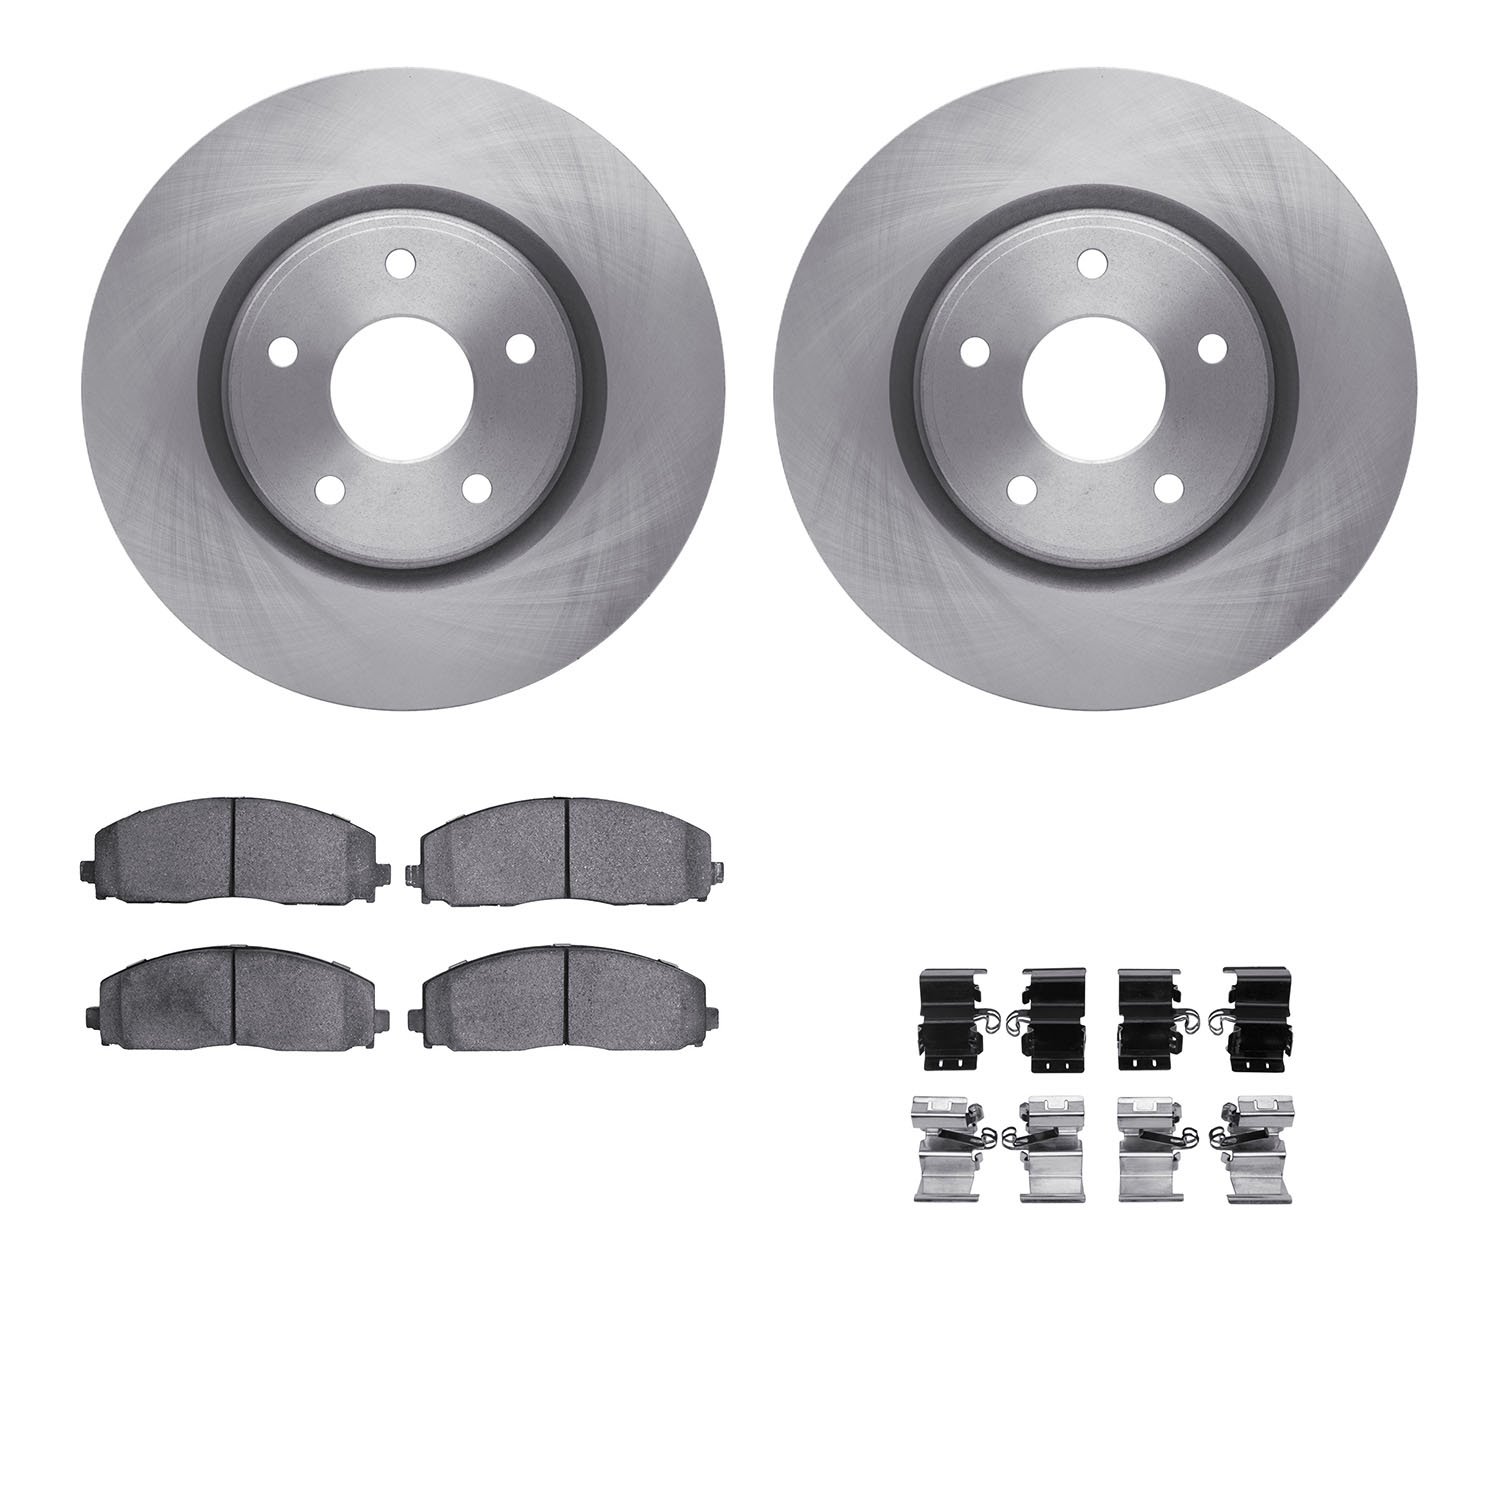 6412-40064 Brake Rotors with Ultimate-Duty Brake Pads Kit & Hardware, Fits Select Multiple Makes/Models, Position: Front